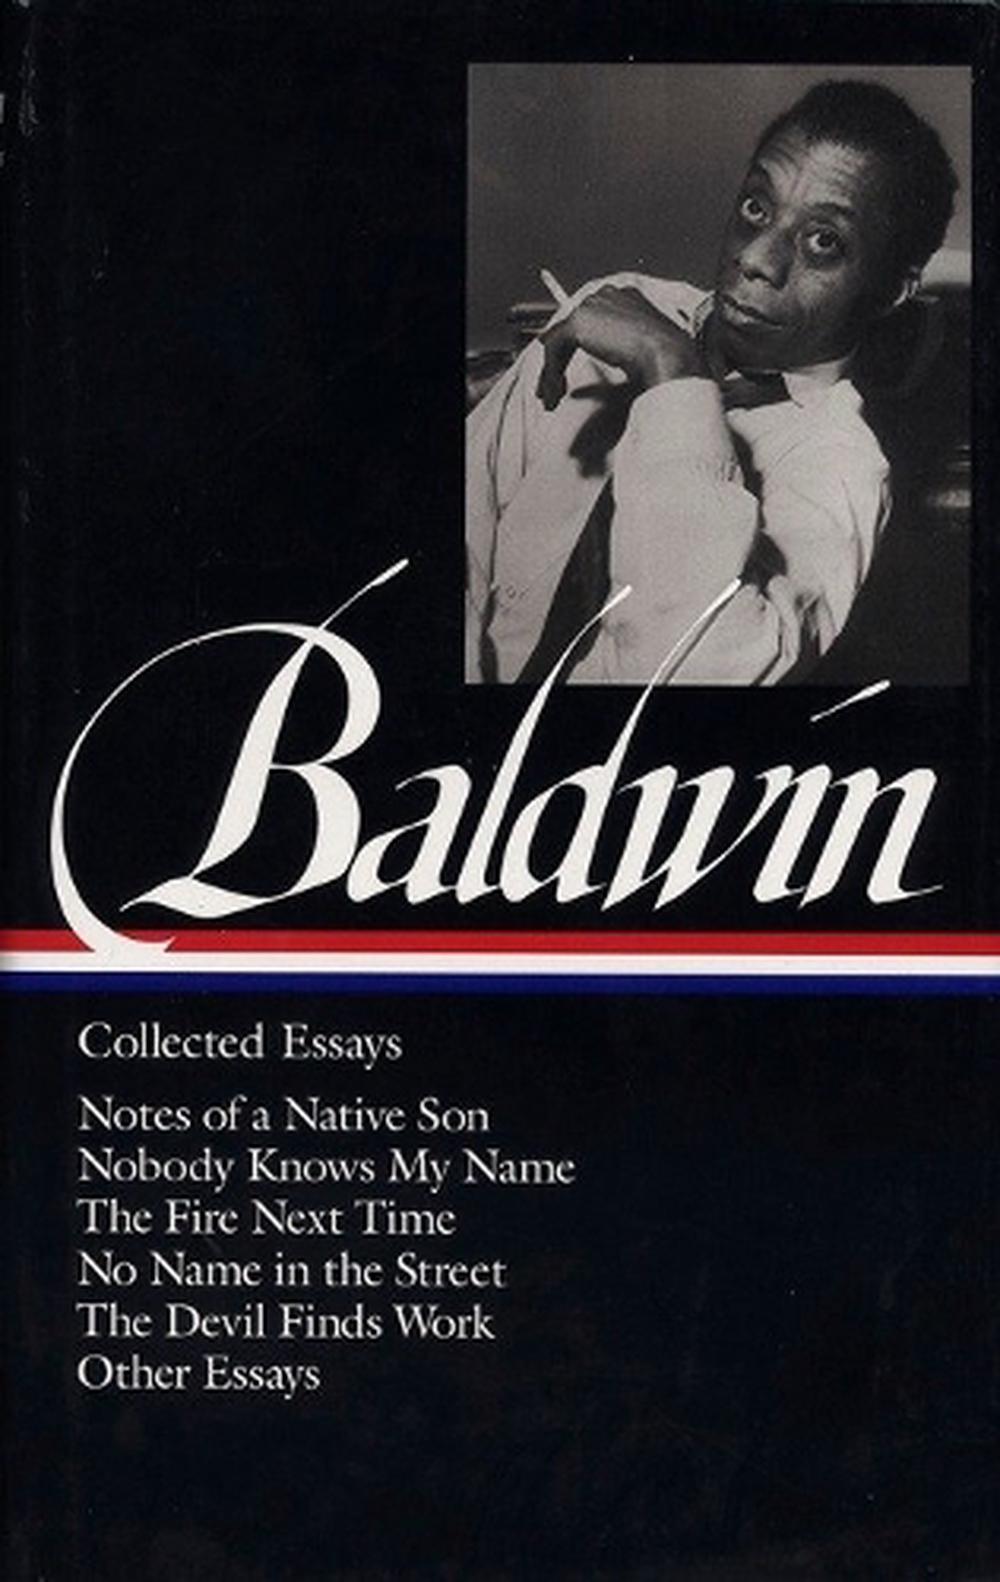 james baldwin collected essays table of contents